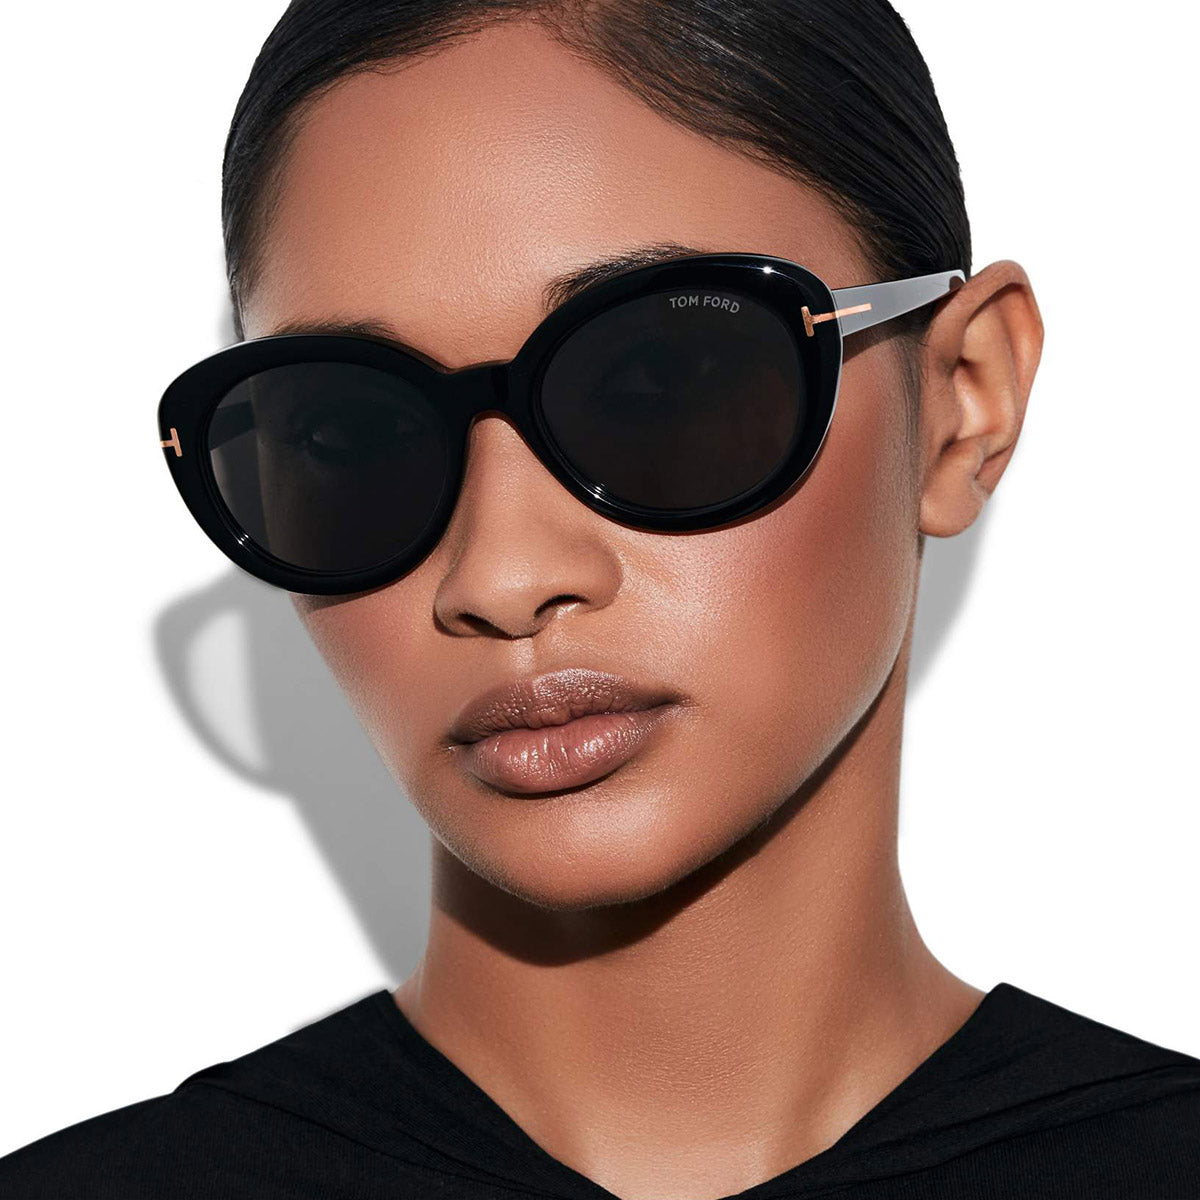 lenshop on X: The Tom Ford sunglasses are ideal for a wide range